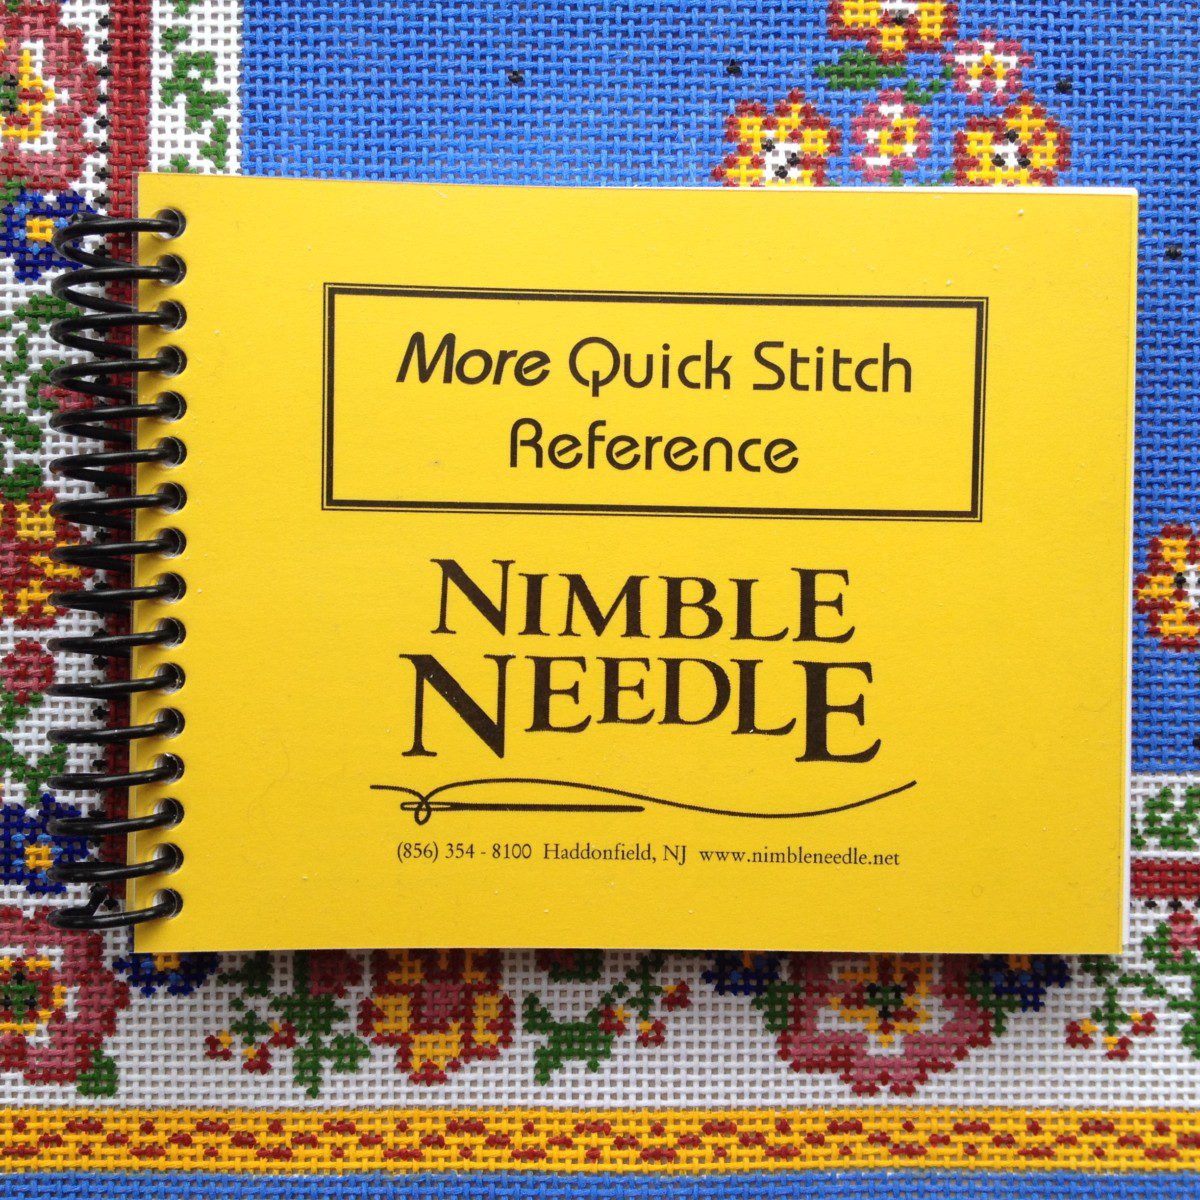 Needlepoint Stitch Reference Book More Quick Stitch Reference by Nimble Needle 